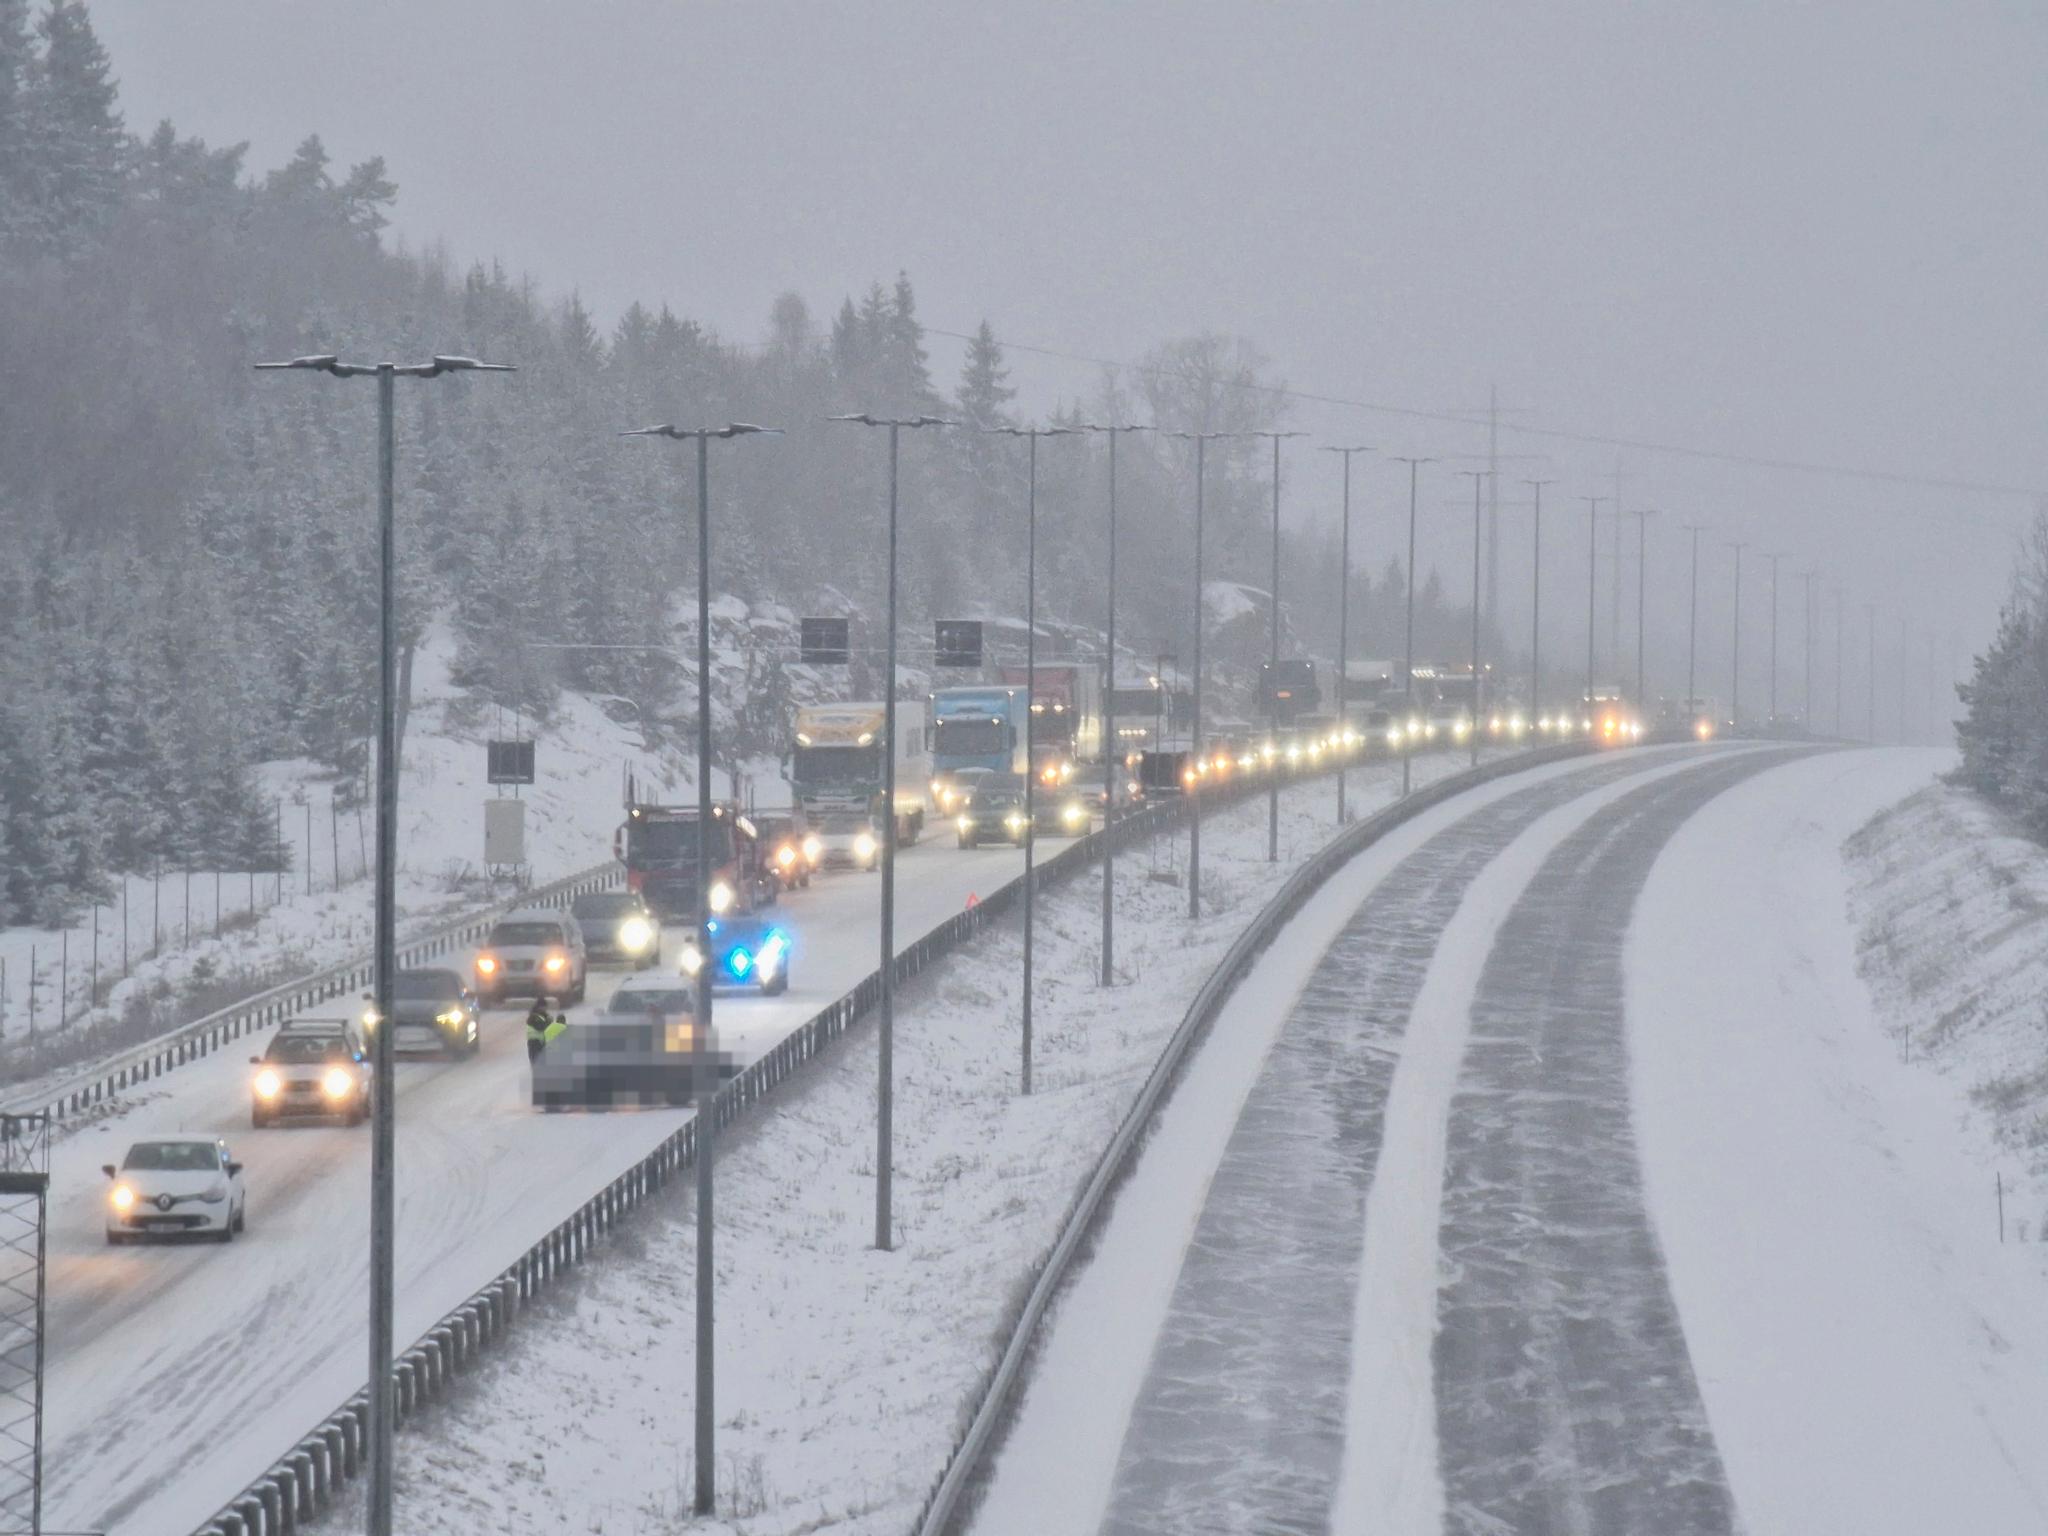 Major Traffic Problems and Canceled Flights Caused by Storms in Southern Norway